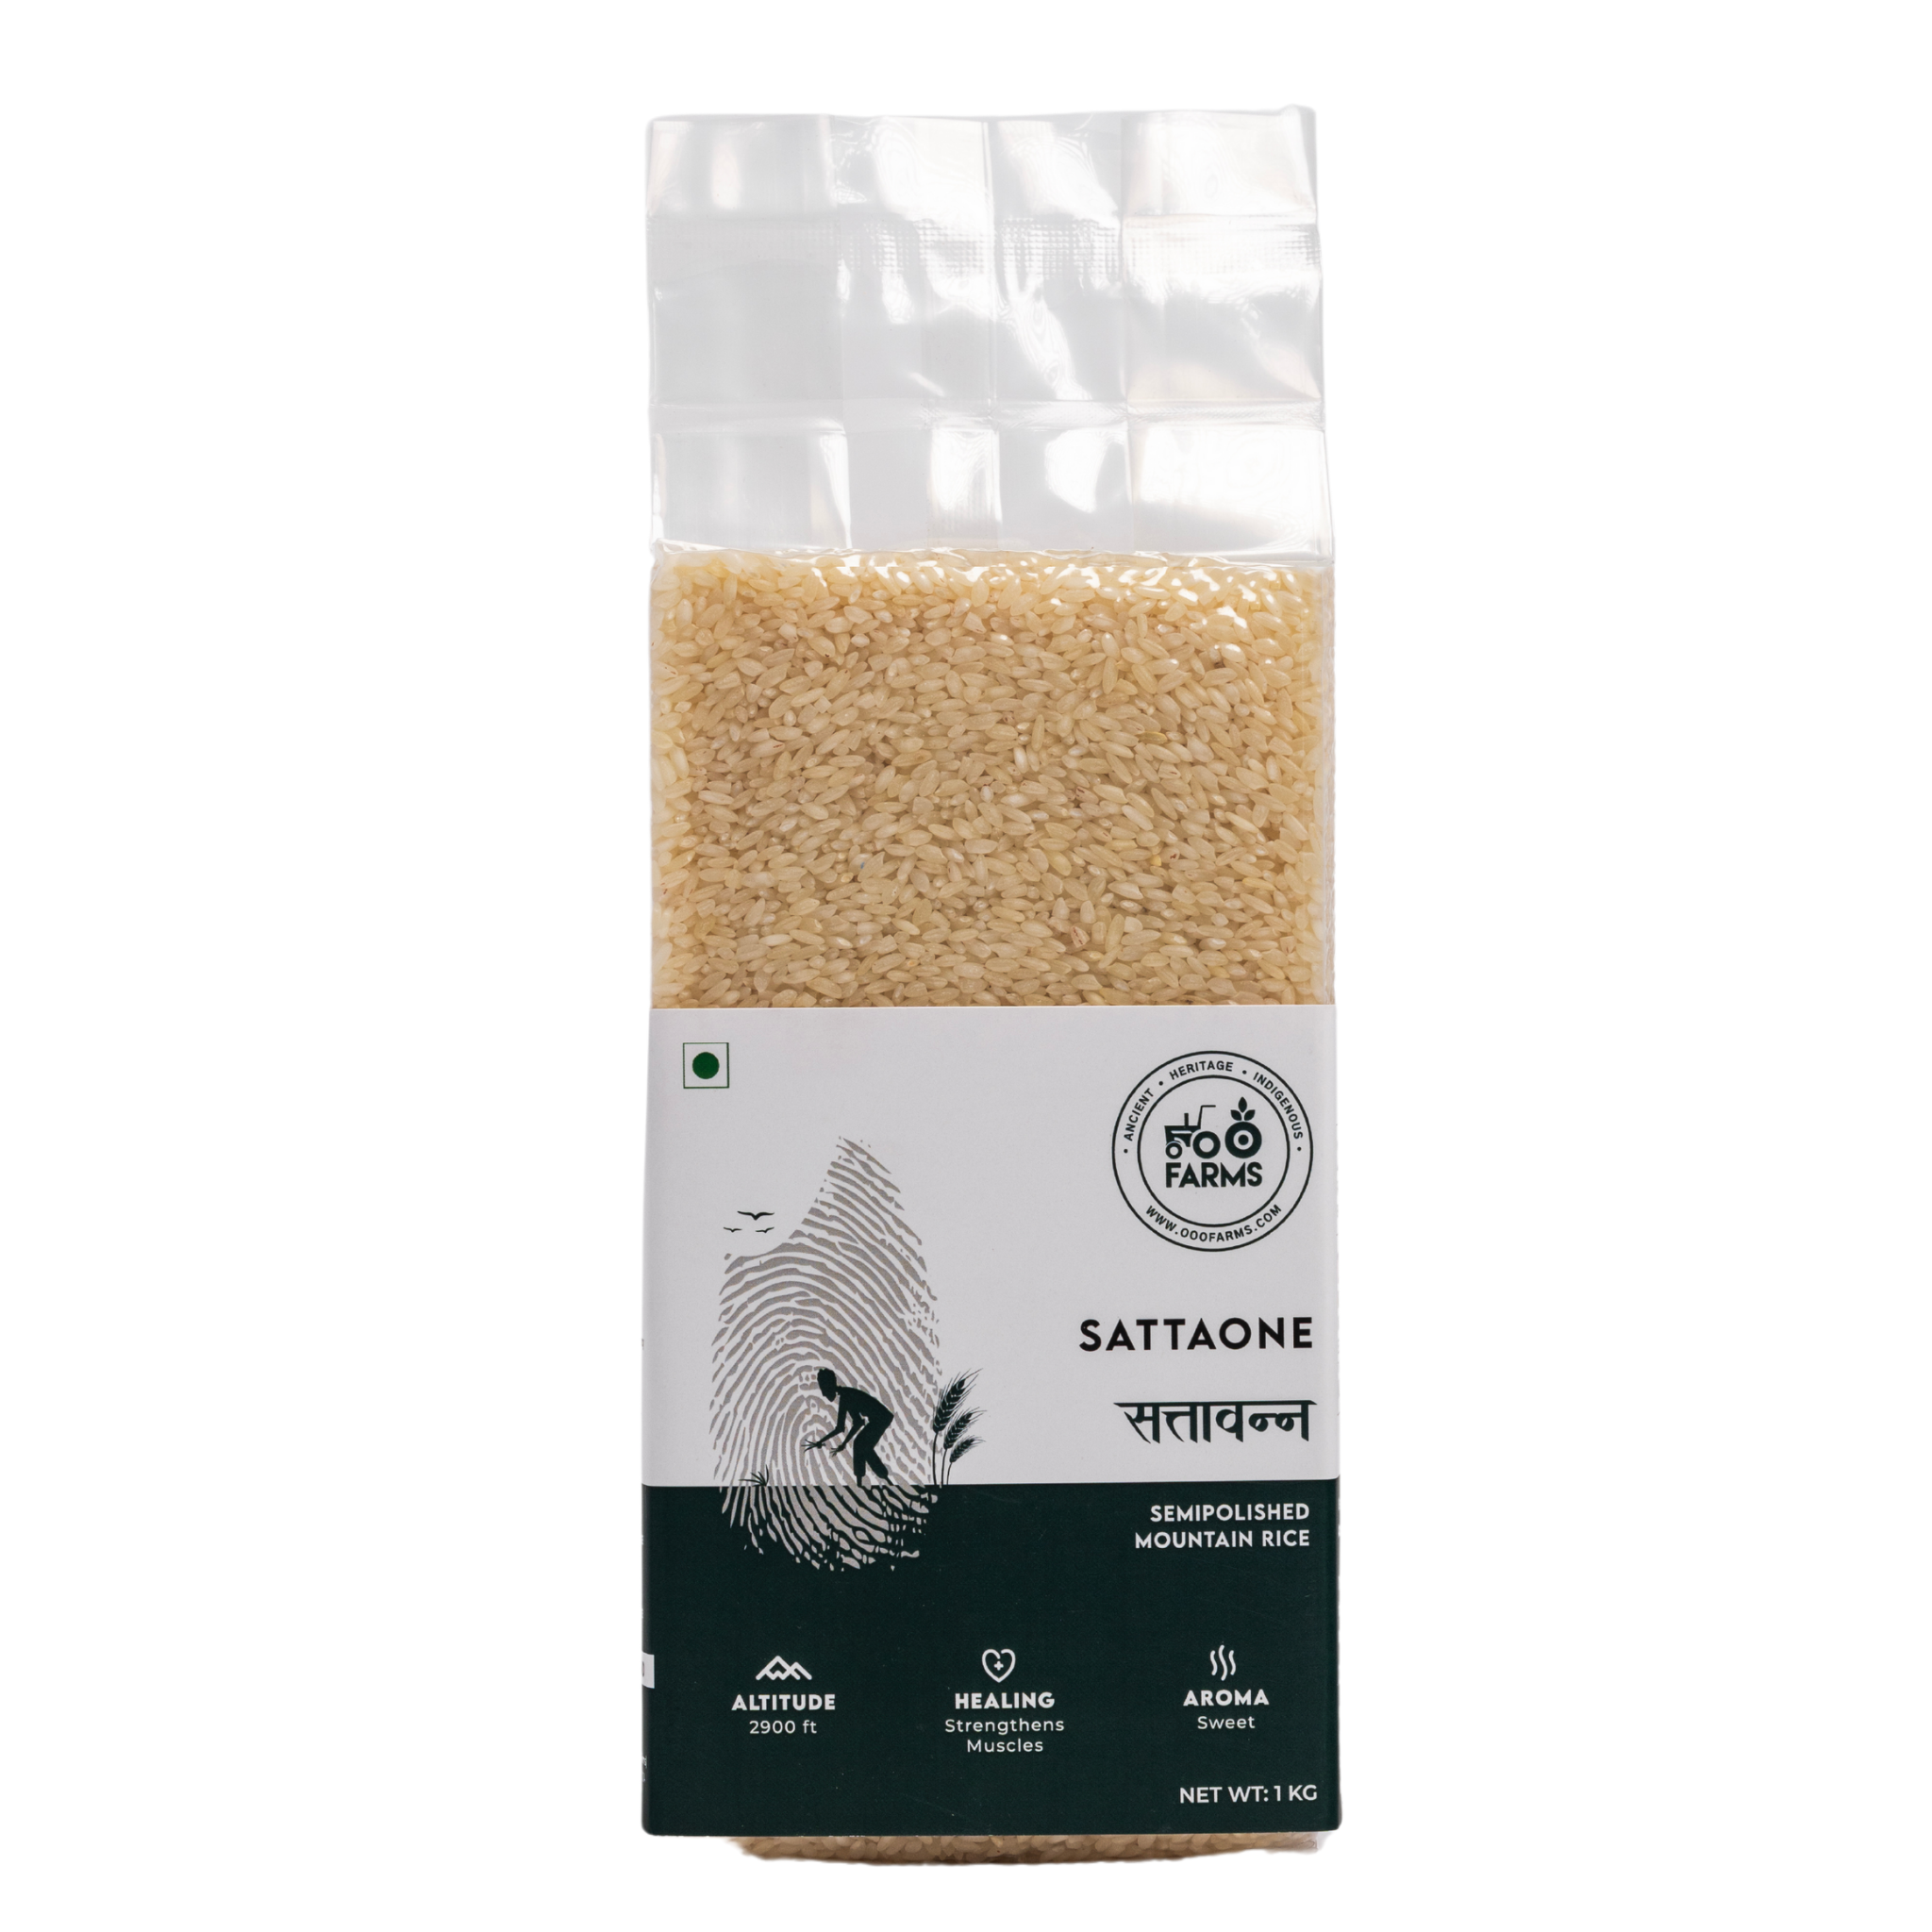 OOO Farms Sattaone Rice (Semi Polished) Package Frontside